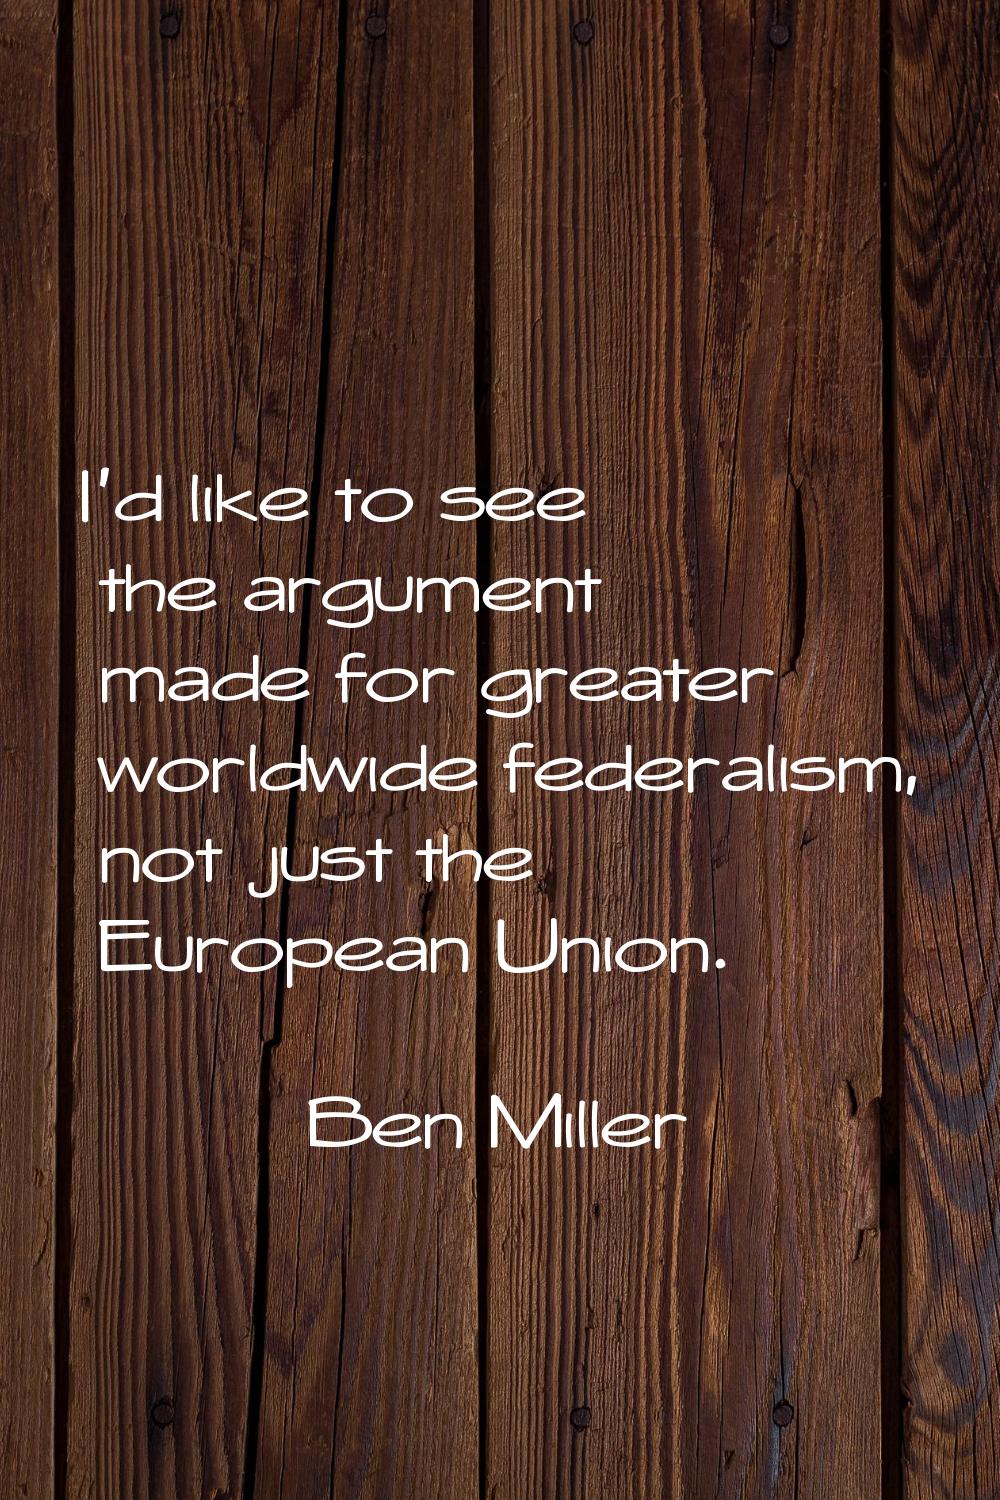 I'd like to see the argument made for greater worldwide federalism, not just the European Union.